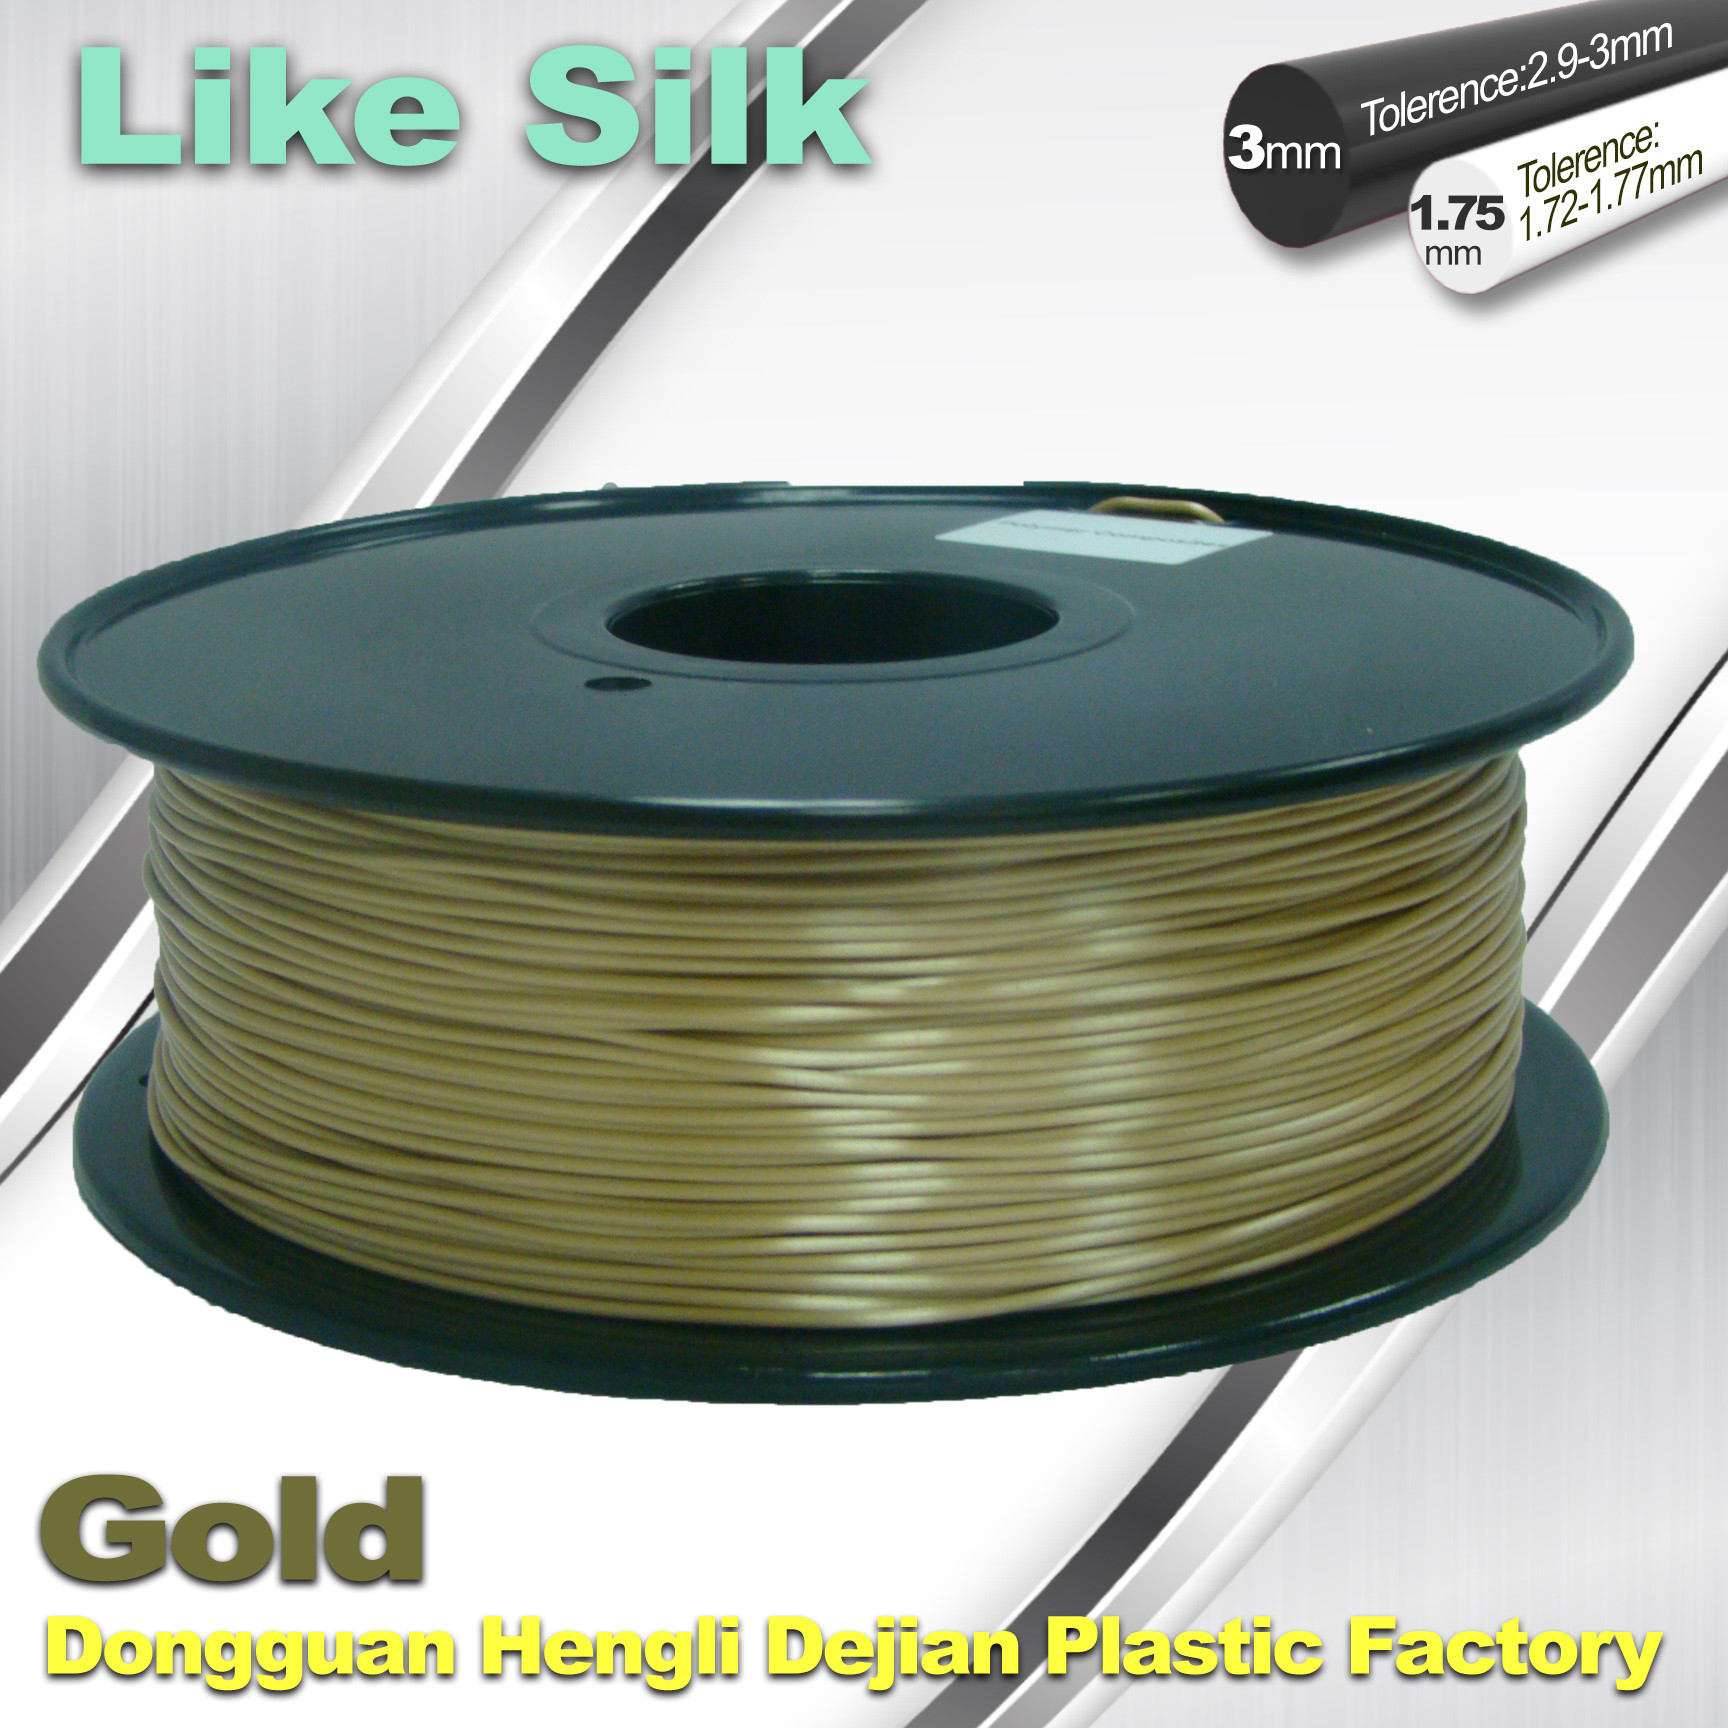 Buy cheap Polymer Composites 3D Printer Filament , 1.75mm / 3.0mm , Gold Colors. Like Silk Filament product